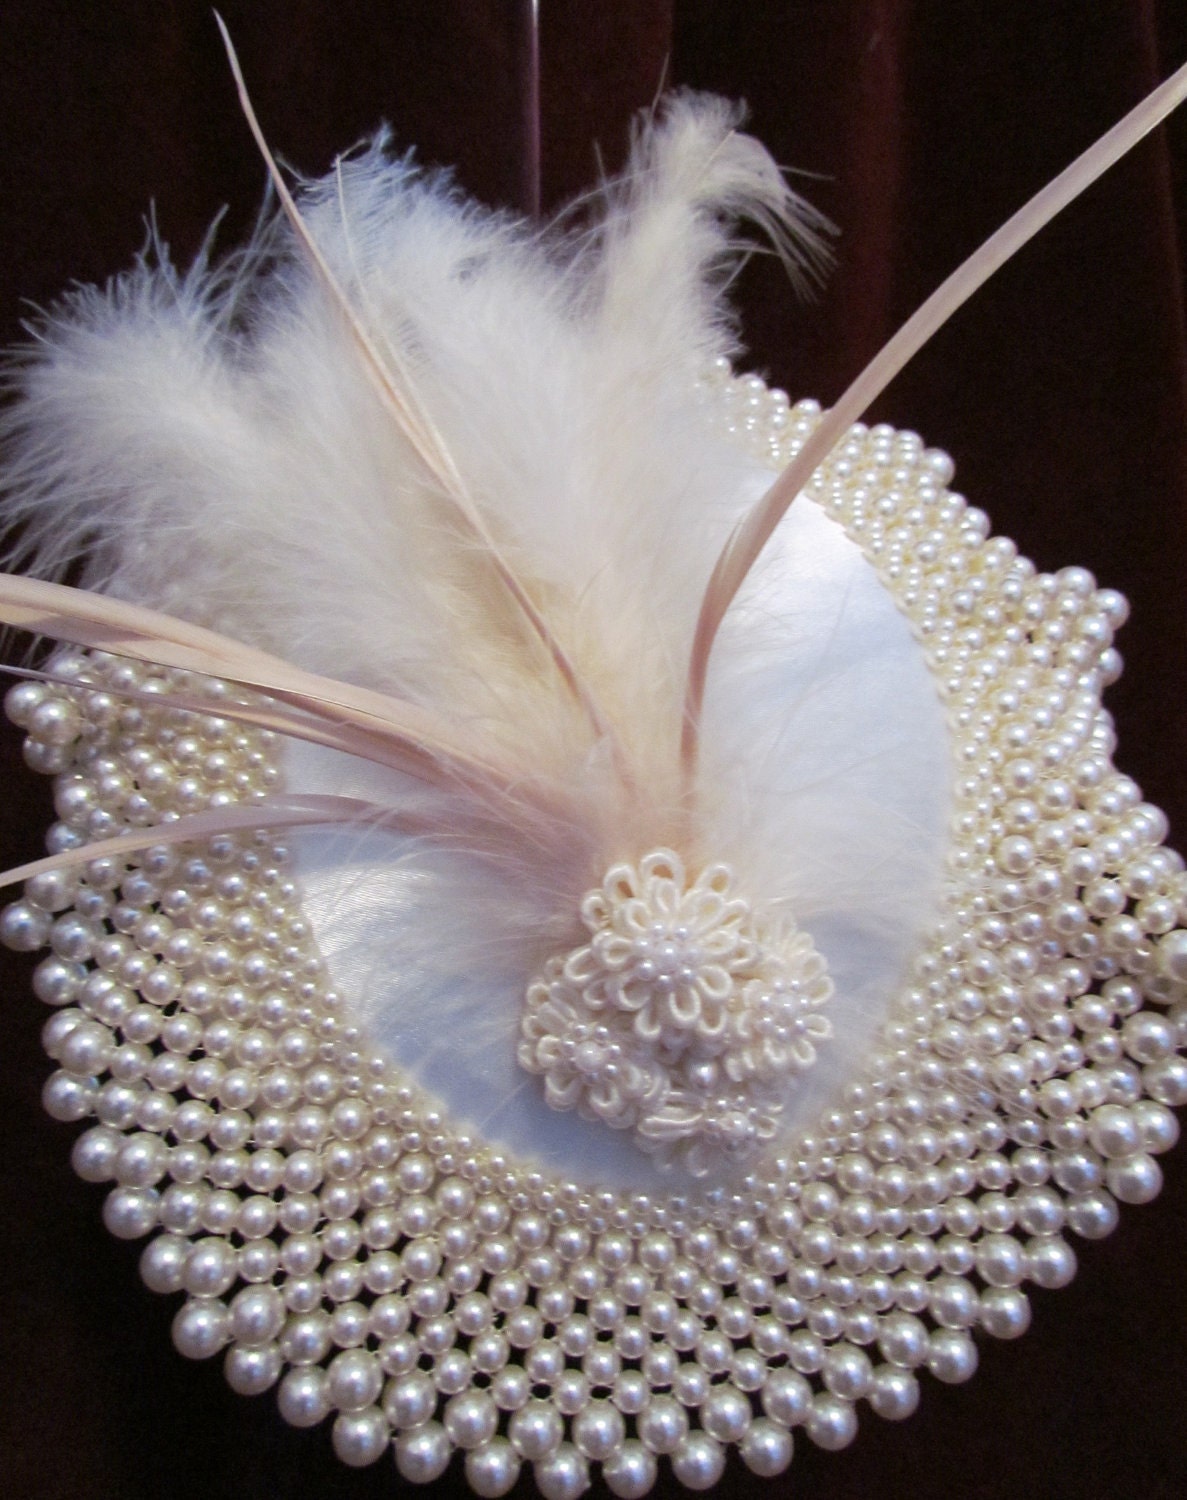 Hat of Pearls, pearl bib, pearl and satin flowers, white feathers, goose biot feathers, headband - CouturePlumes